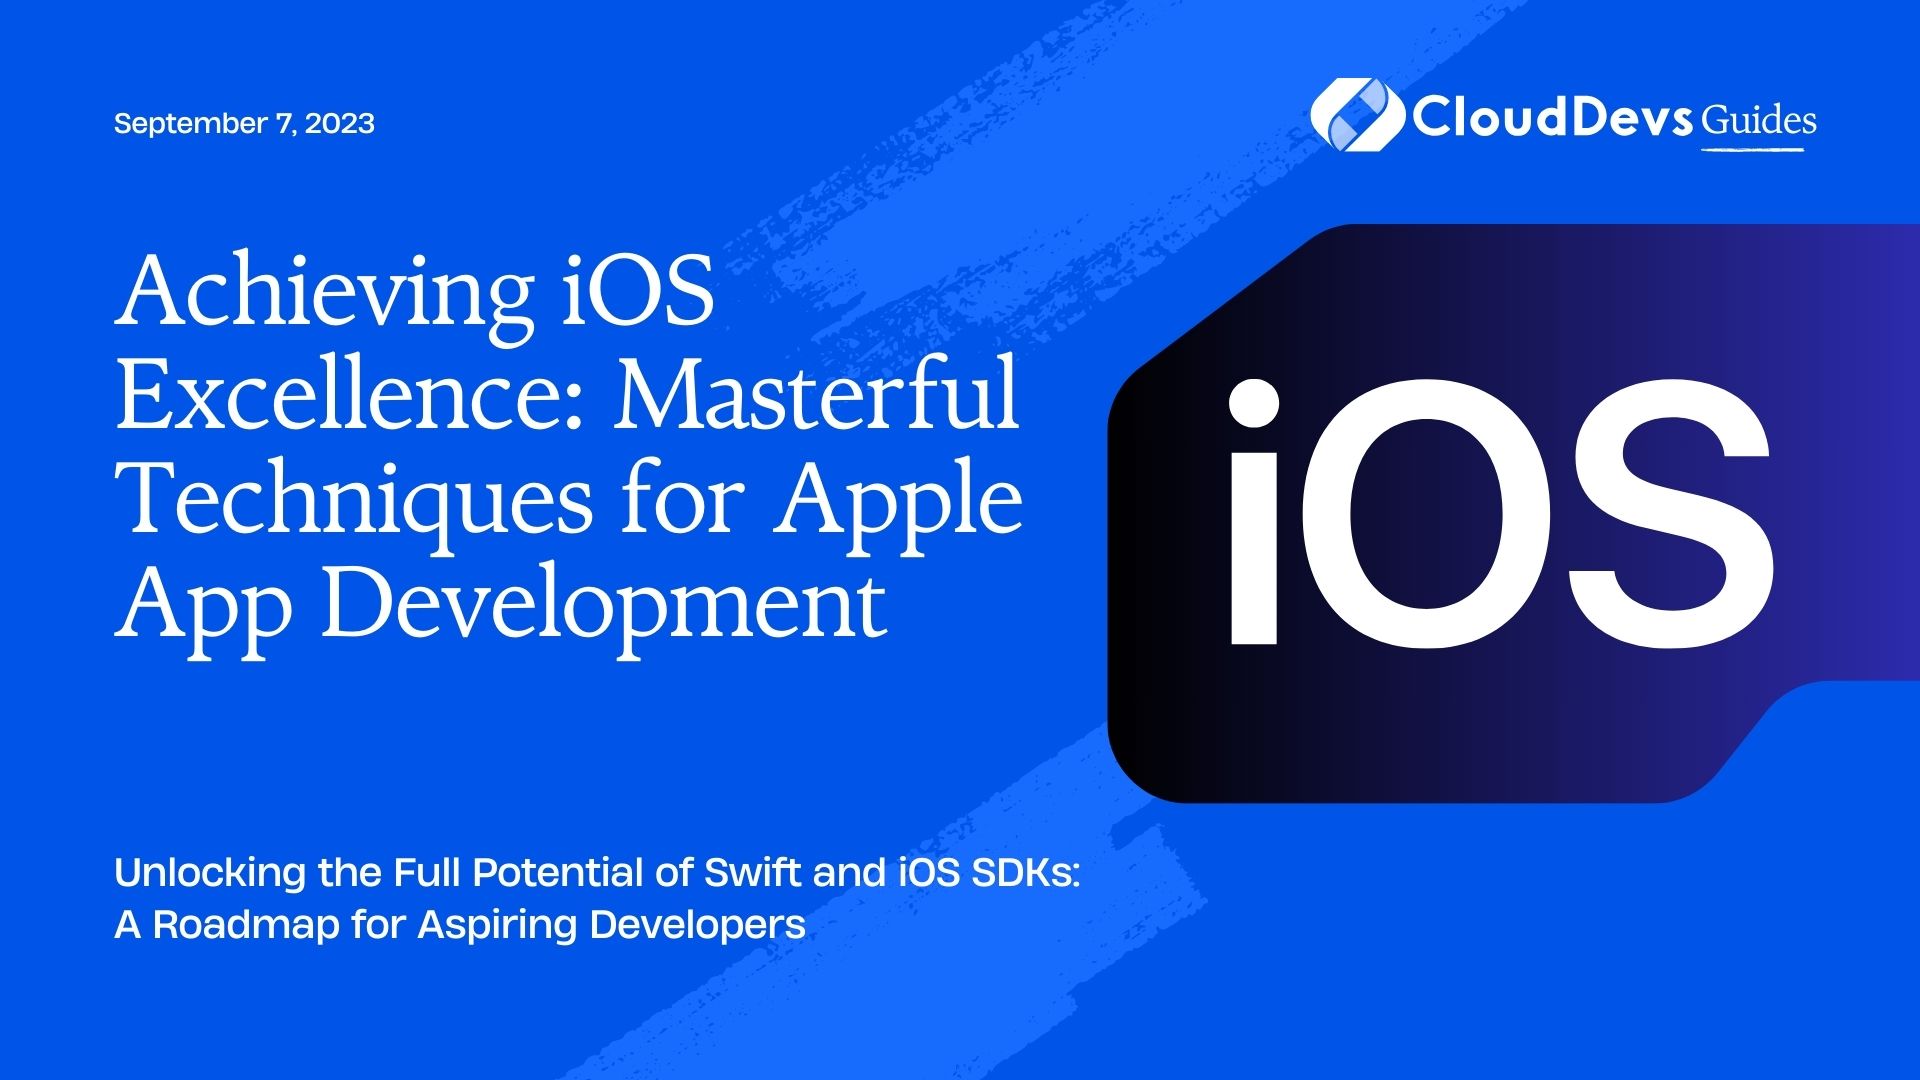 Achieving iOS Excellence: Masterful Techniques for Apple App Development